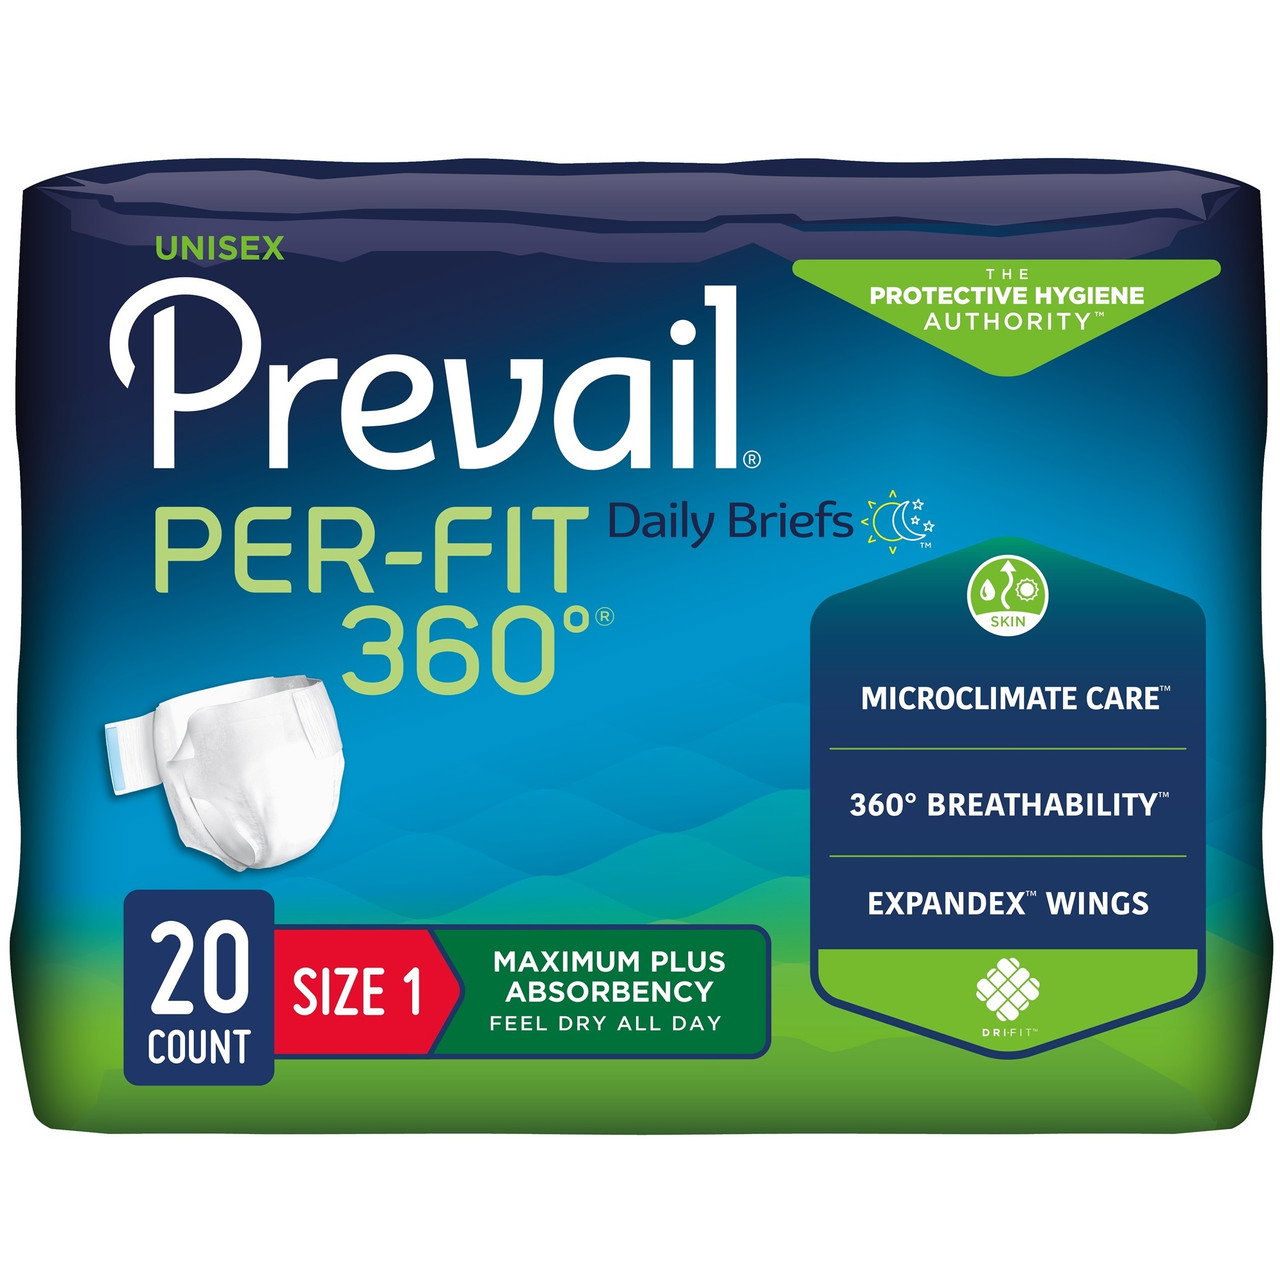 Image of Prevail Per-Fit 360 Daily Adult Diapers with Tabs, Maximum Plus